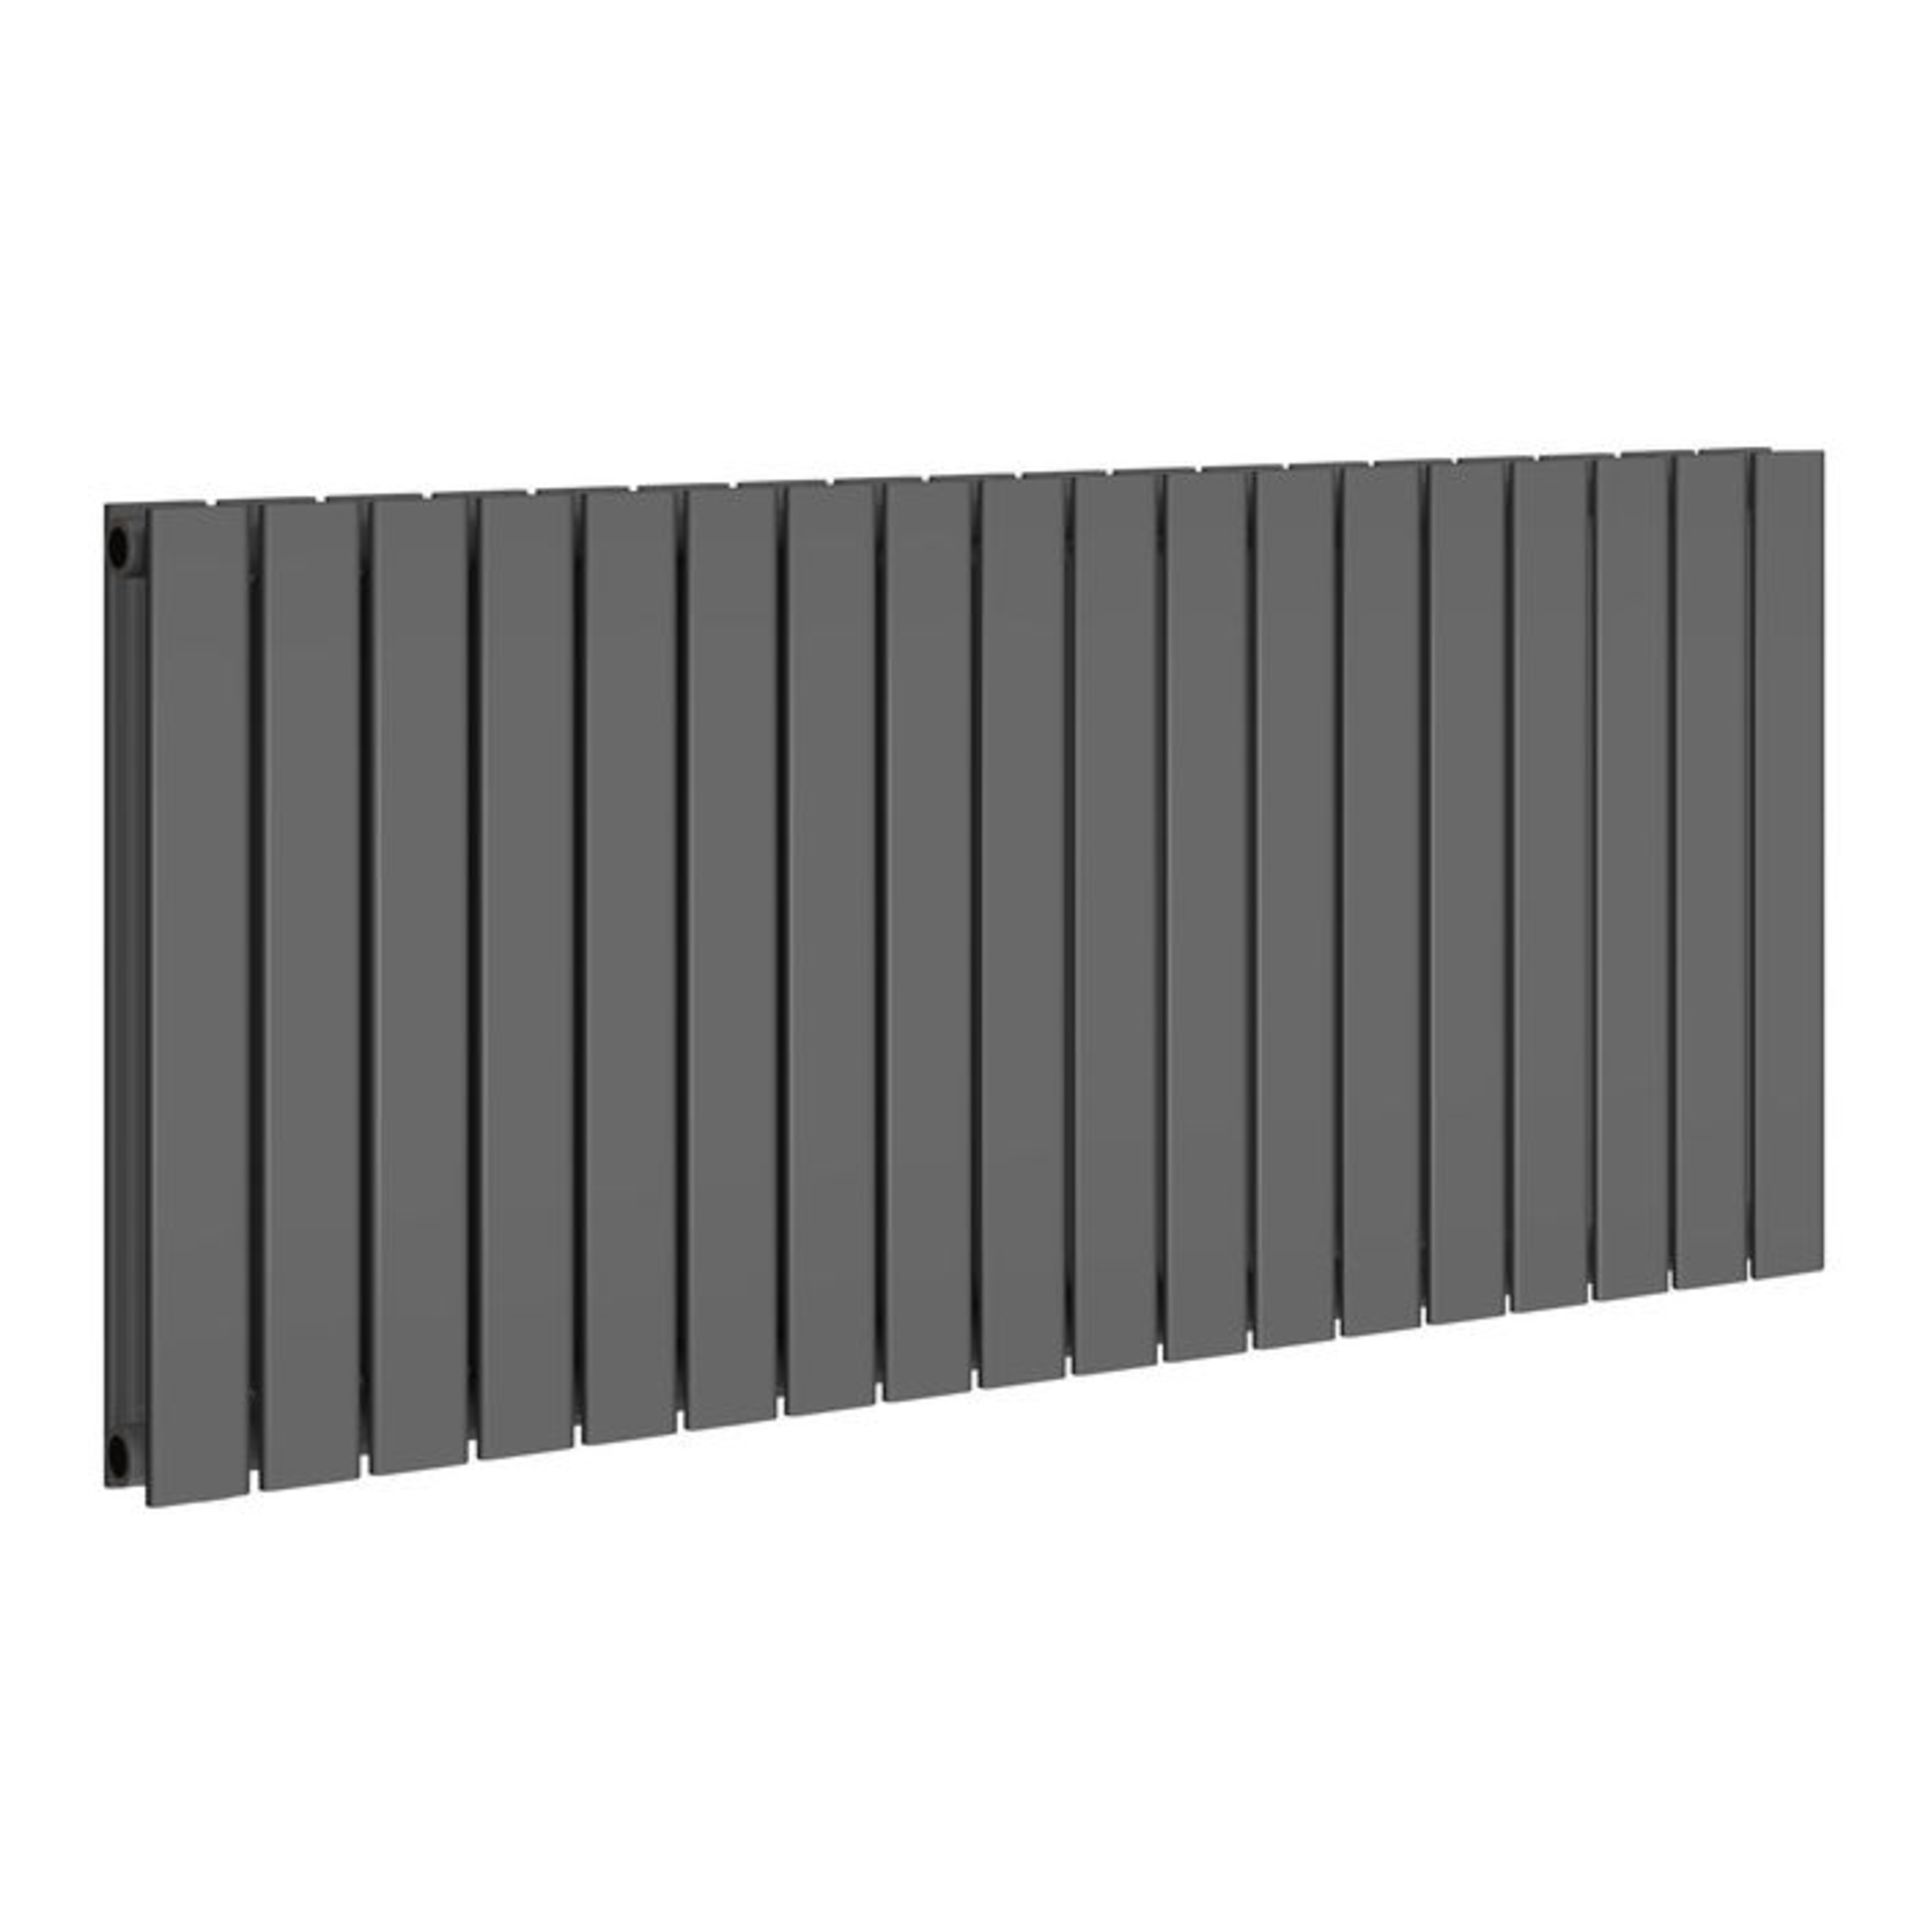 635x1380mm Anthracite Double Flat Panel Horizontal Radiator. RRP £554.99. Made with low carbon... - Image 4 of 4